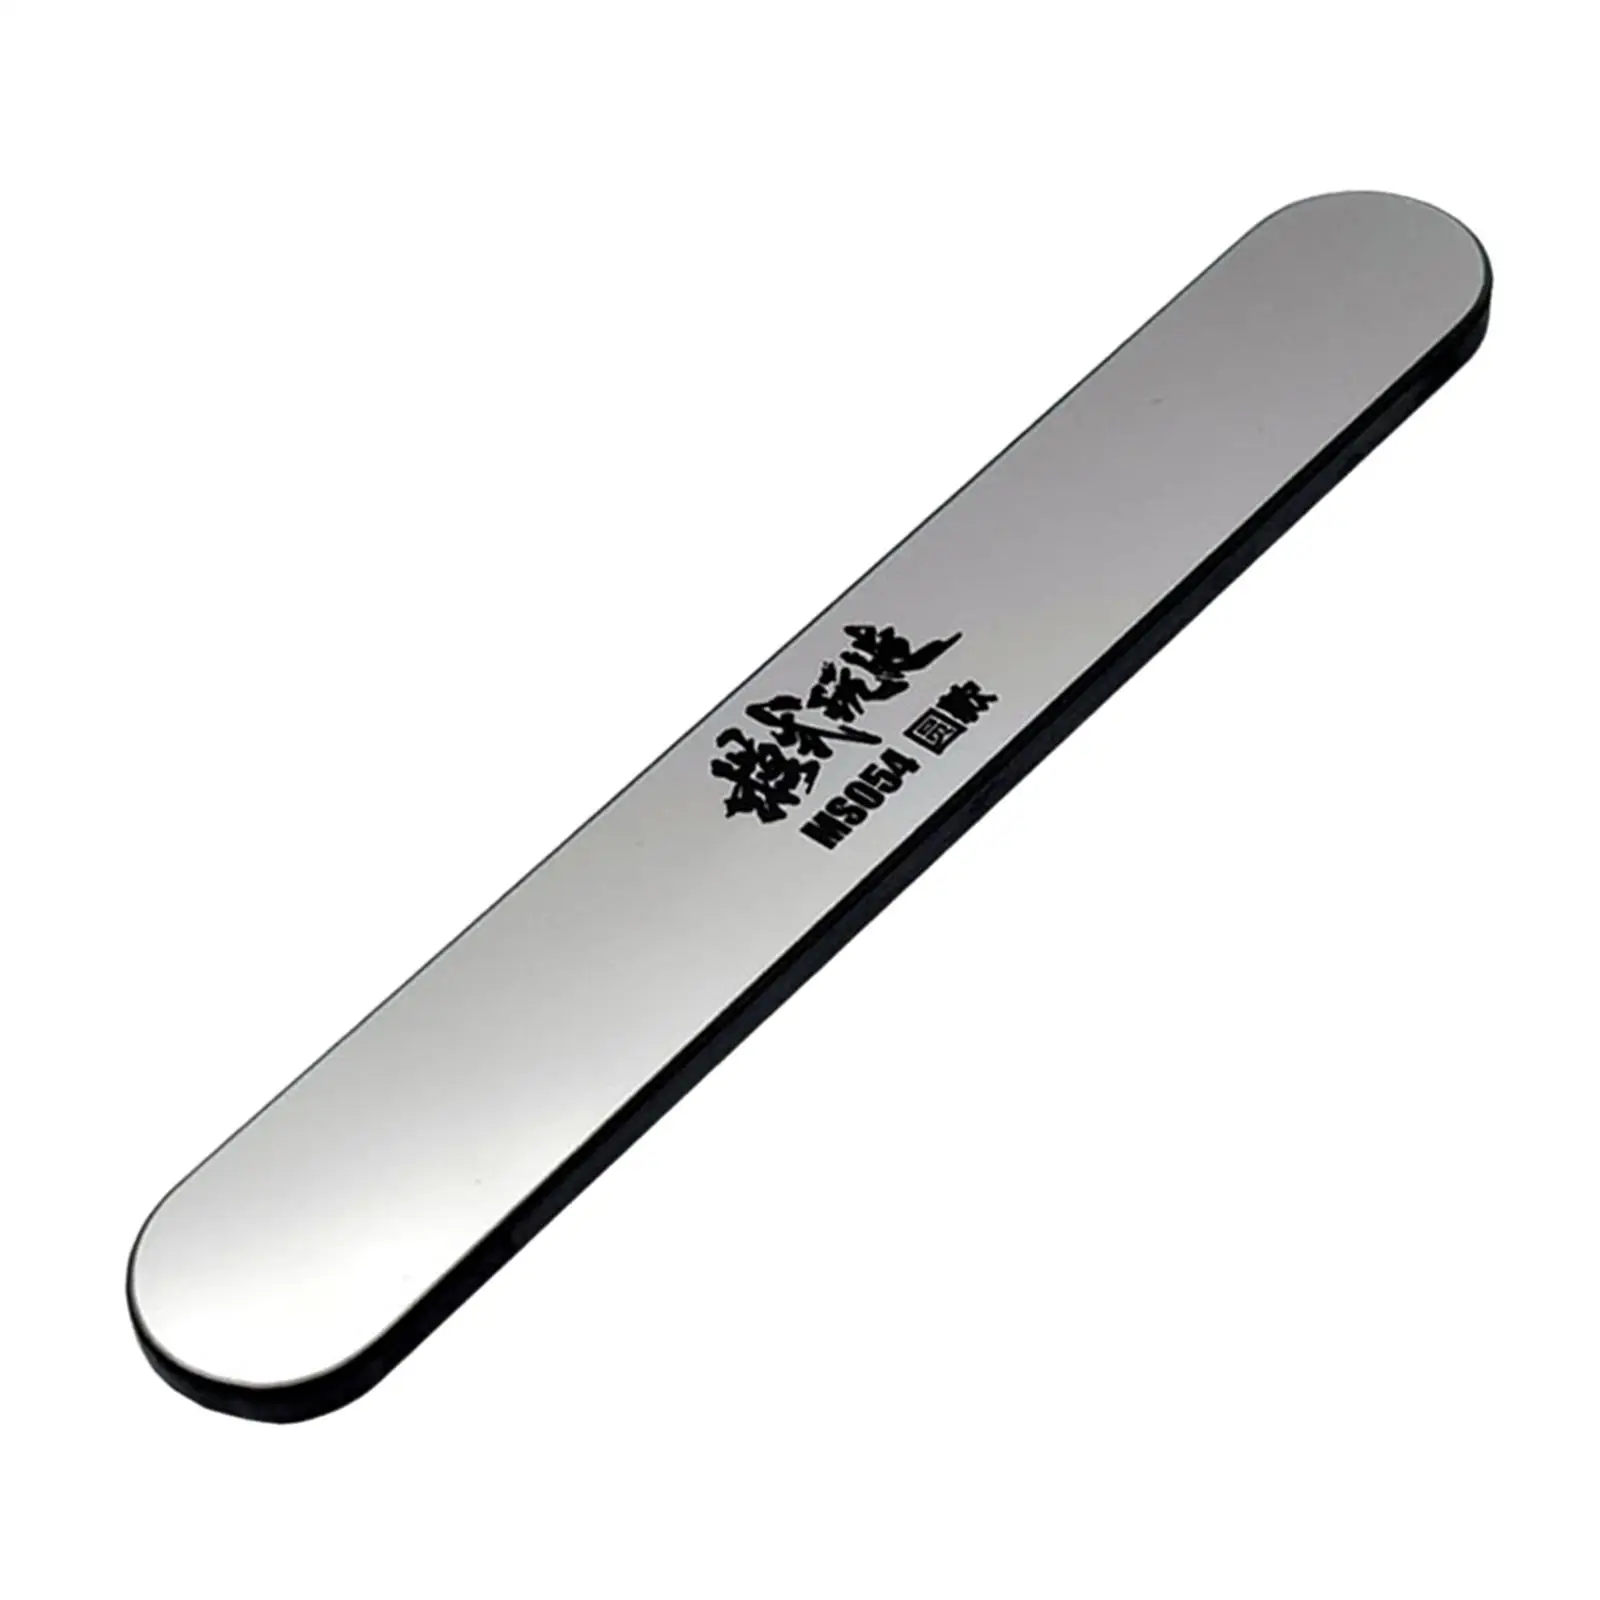 Precision Glass File for Models and for Car and Plane Kits Hobby Polishing Polish Model Kit, Figure, Resin Material Washable